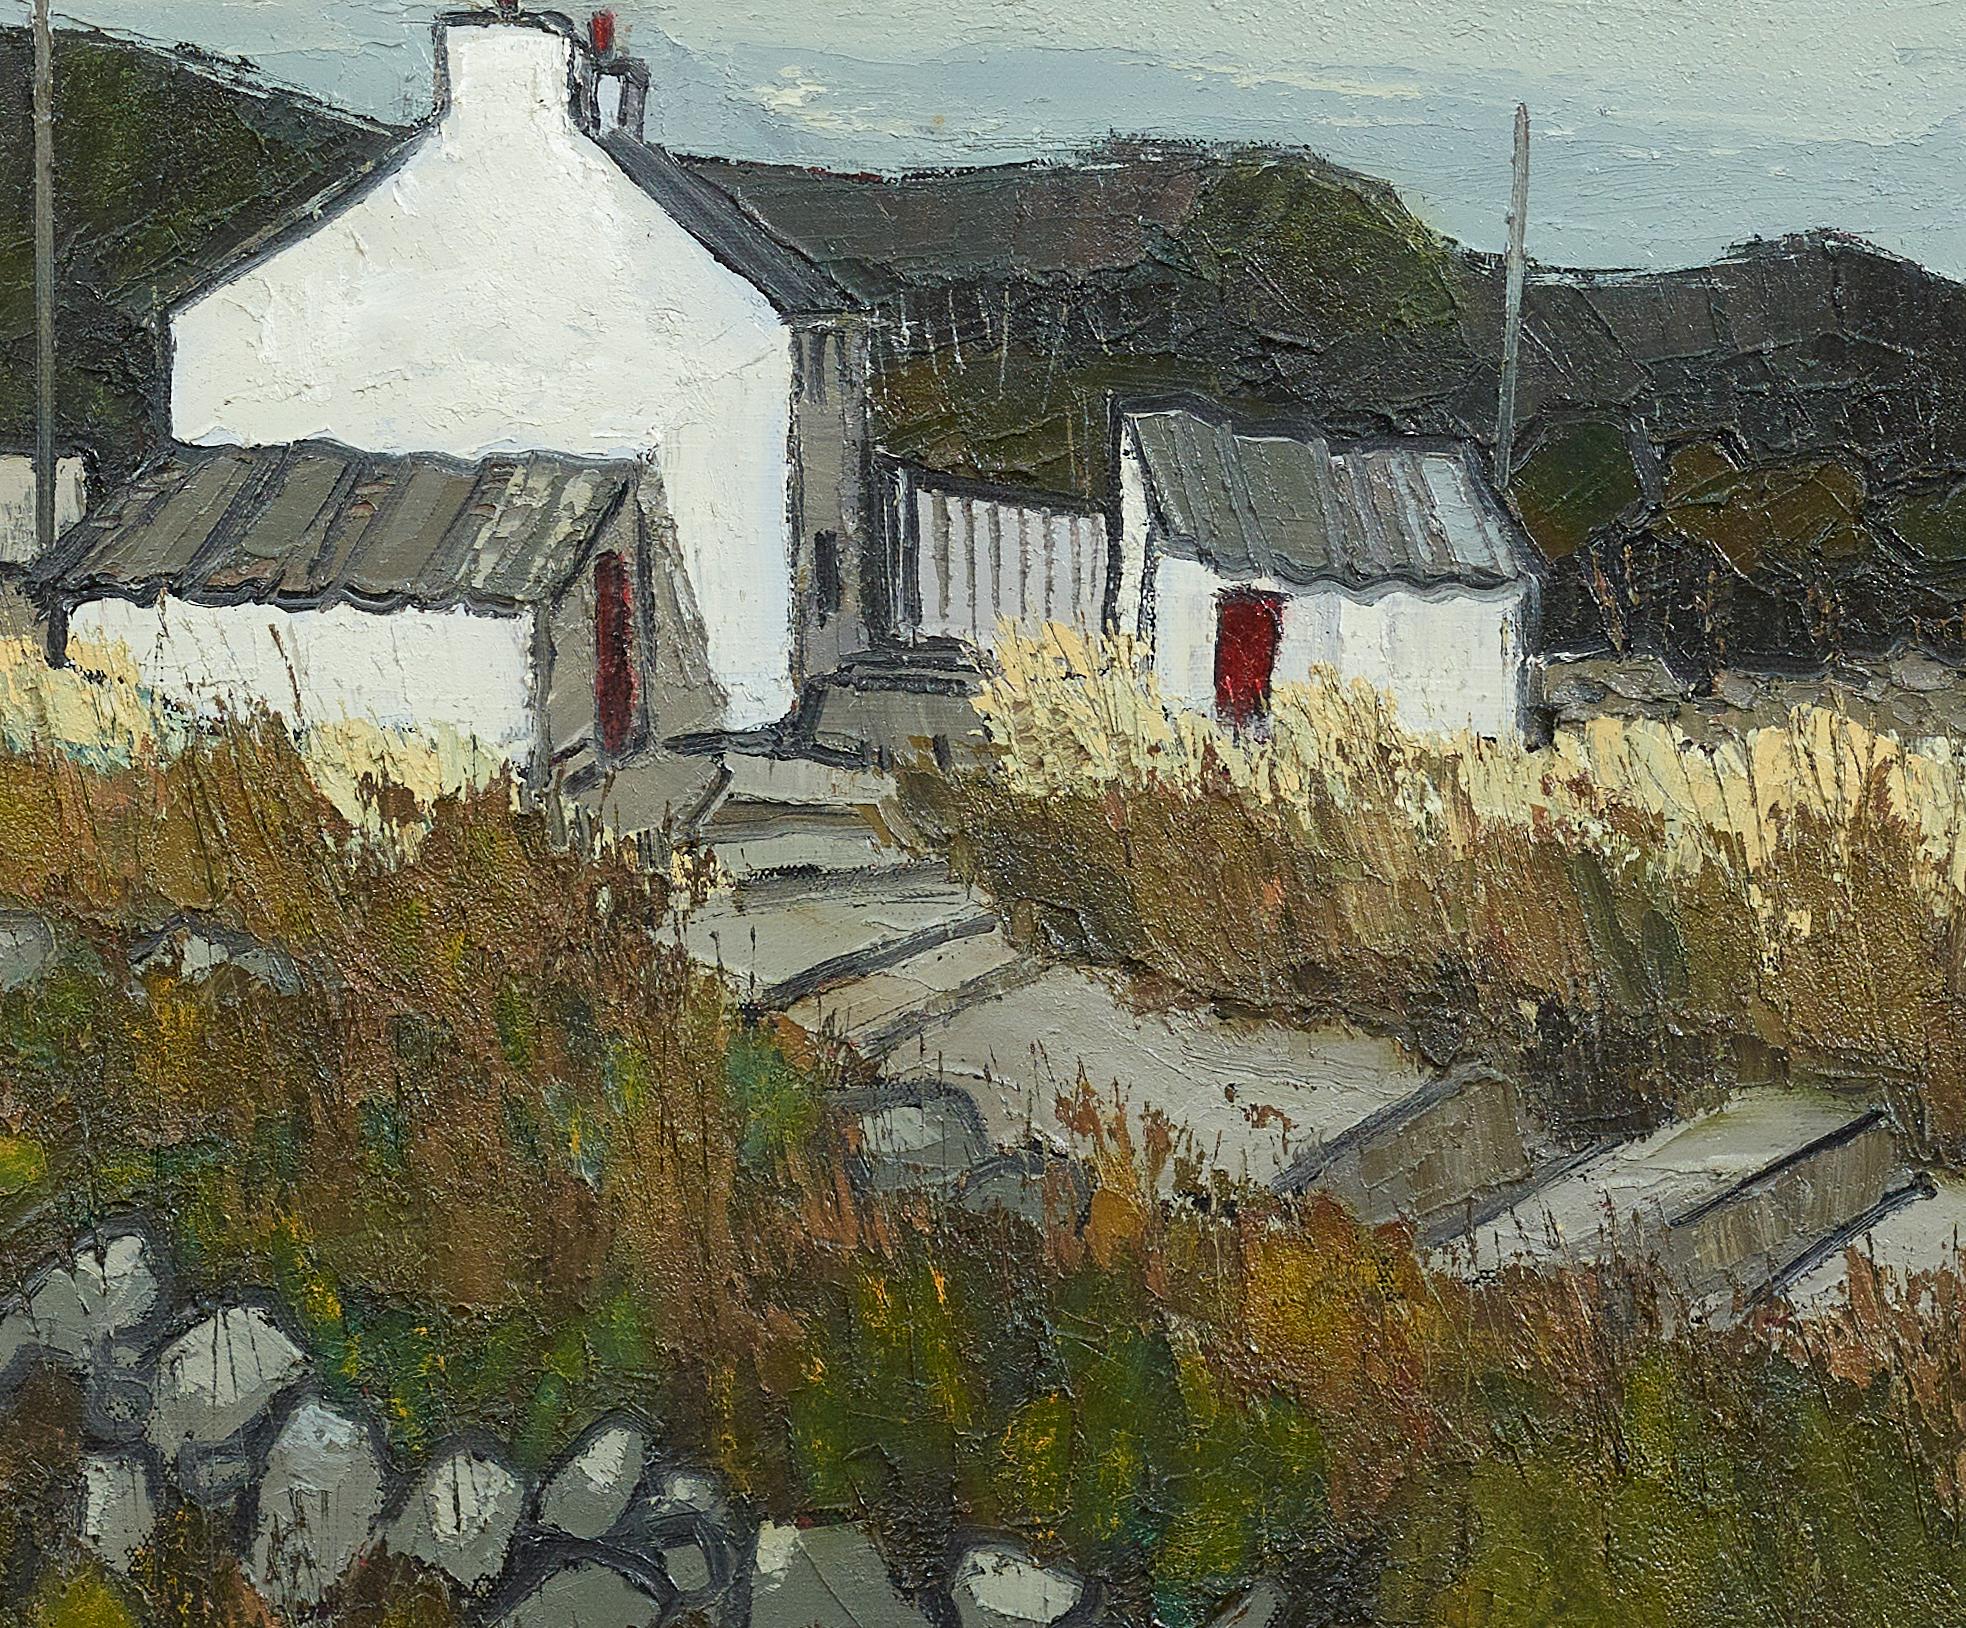 Welsh Landscape Oil Painting 'TyWill' by Wilf Roberts - Black Landscape Painting by Will Roberts